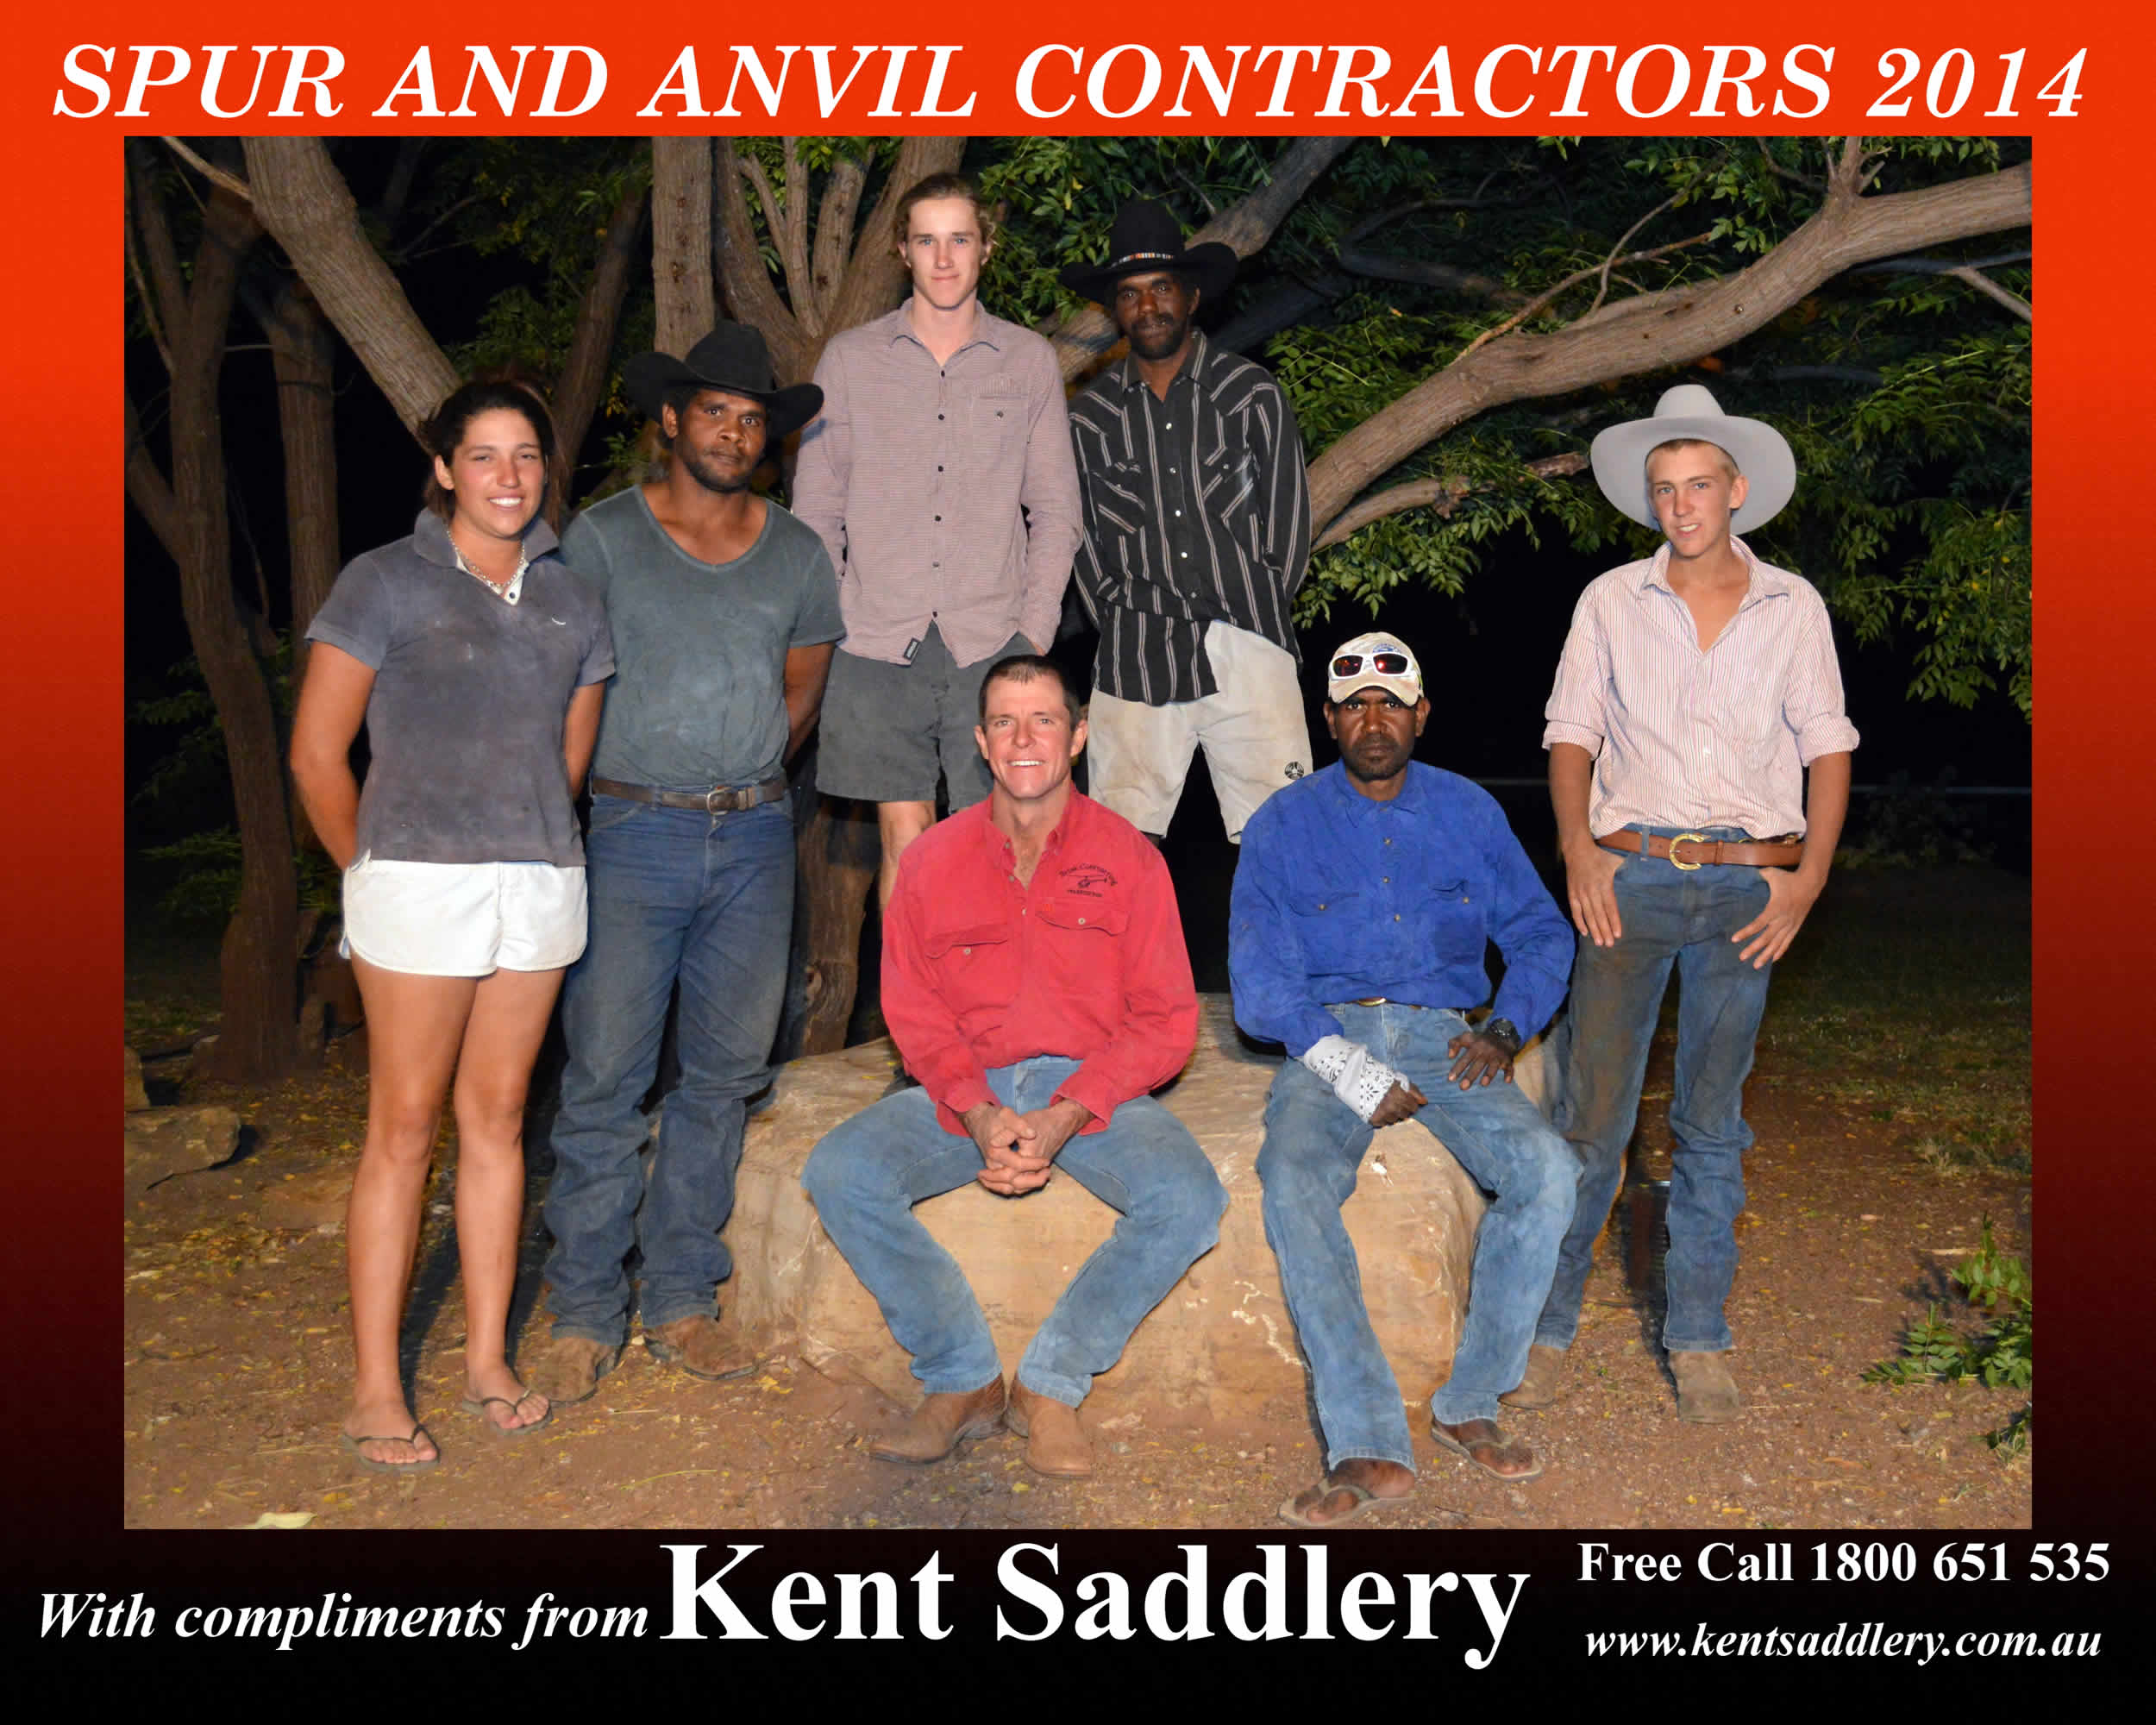 Drovers & Contractors - Spurs and Anvil 6